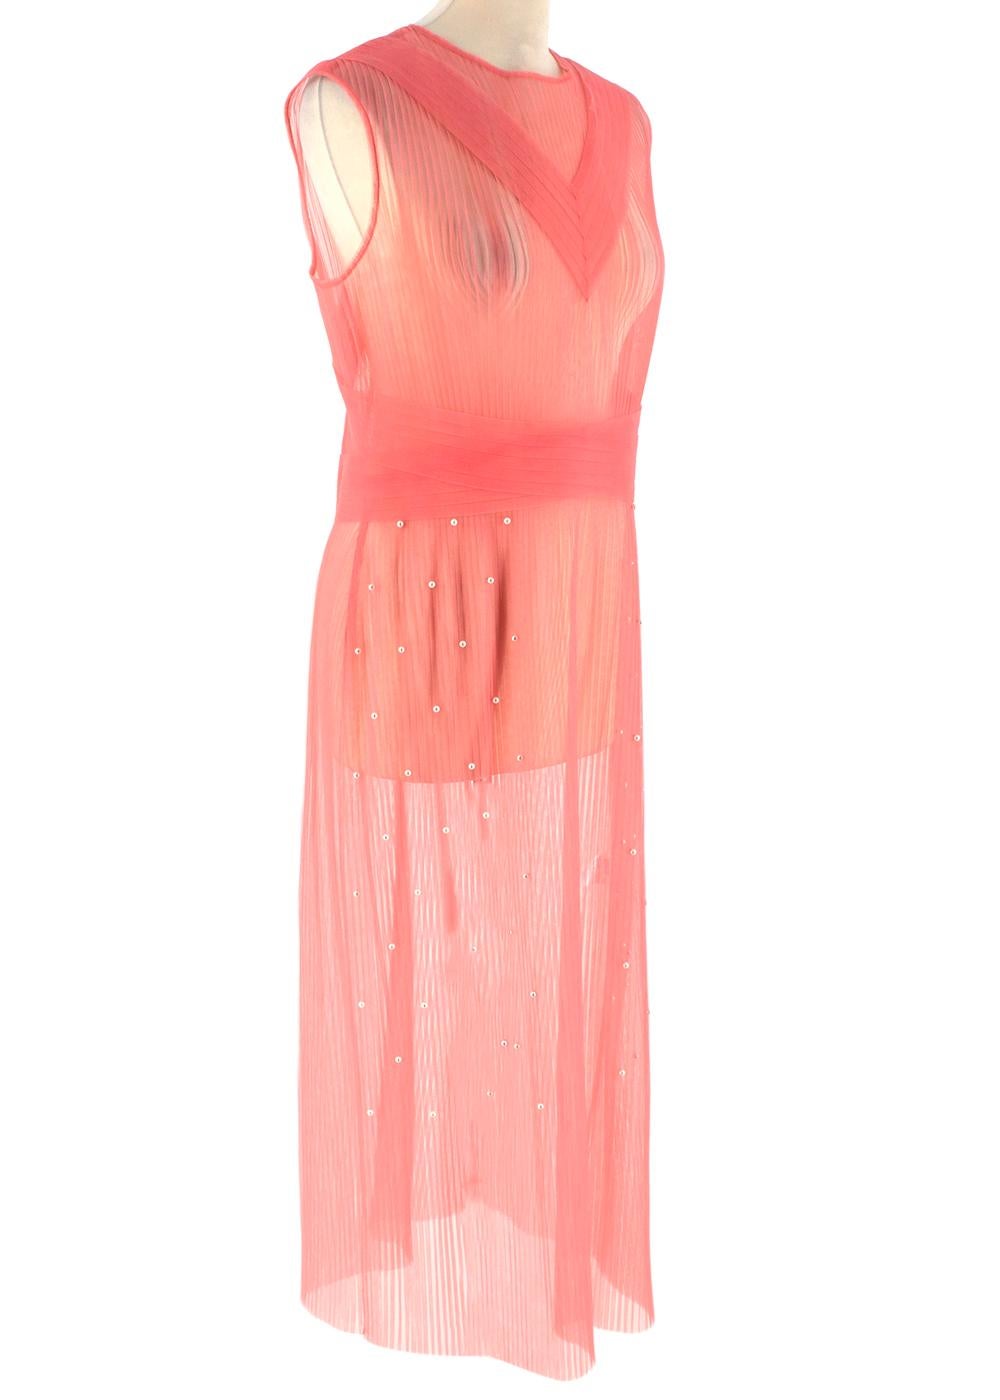 Huishan Zhang Pink Sheer Pearl Embellished Dress

- Pearl embellishment 
- Sleeveless
- Sheer mesh fabric
- Invisible back zip fastening 
- Round neck 

Materials:
Main fabric:
- 100% Polyester 
Trim:
- Imitation Pearl

Hand Wash Only 

Made in